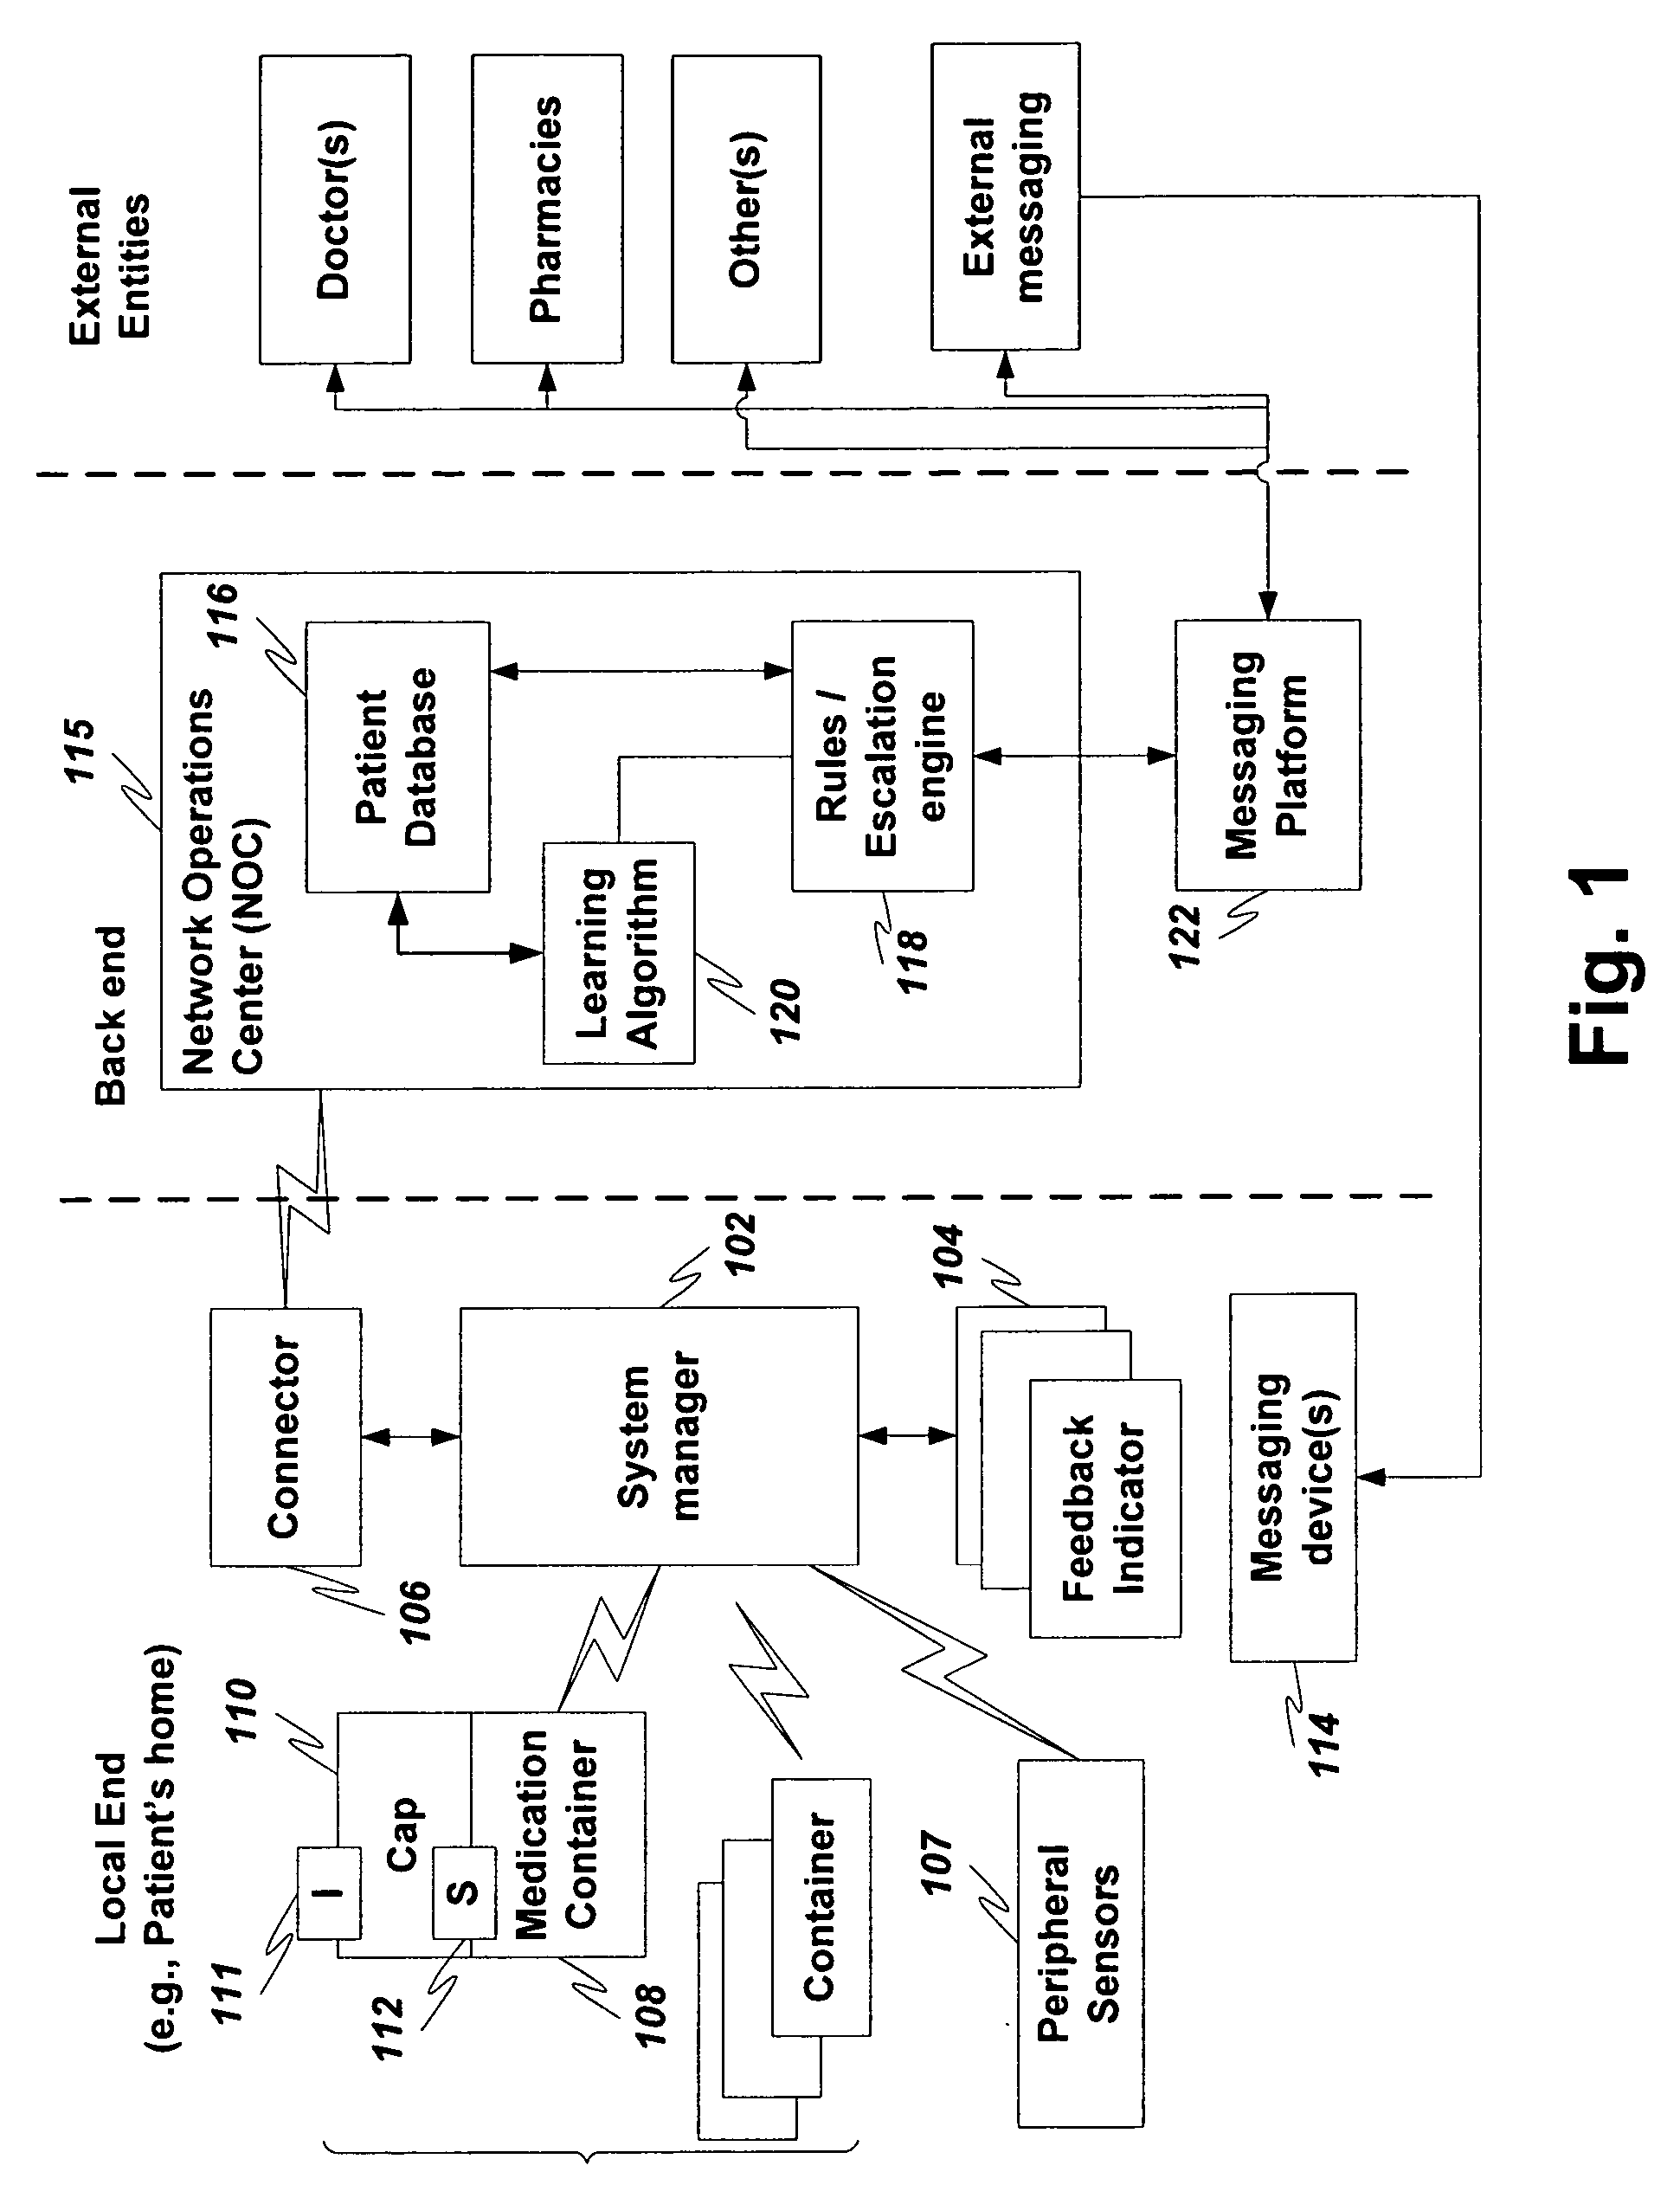 Medication compliance systems, methods and devices with configurable and adaptable escalation engine